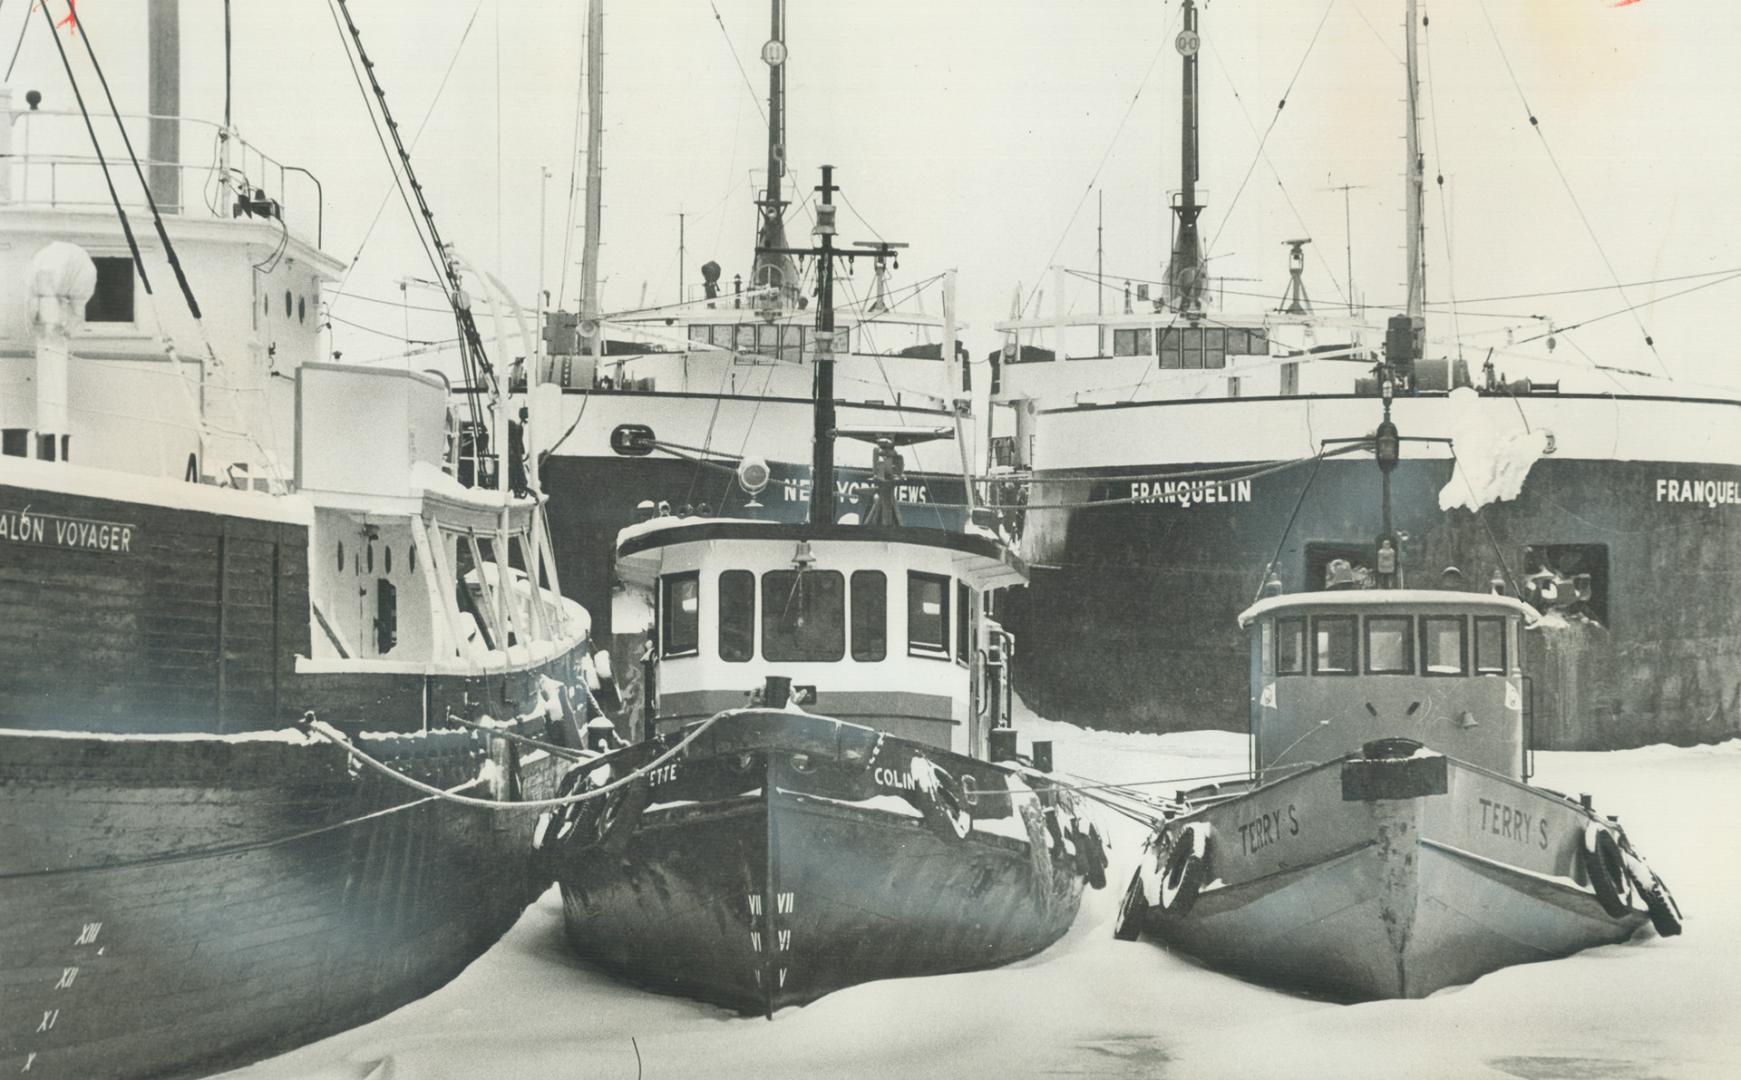 Image shows a number of boats wintering at the Harbour.